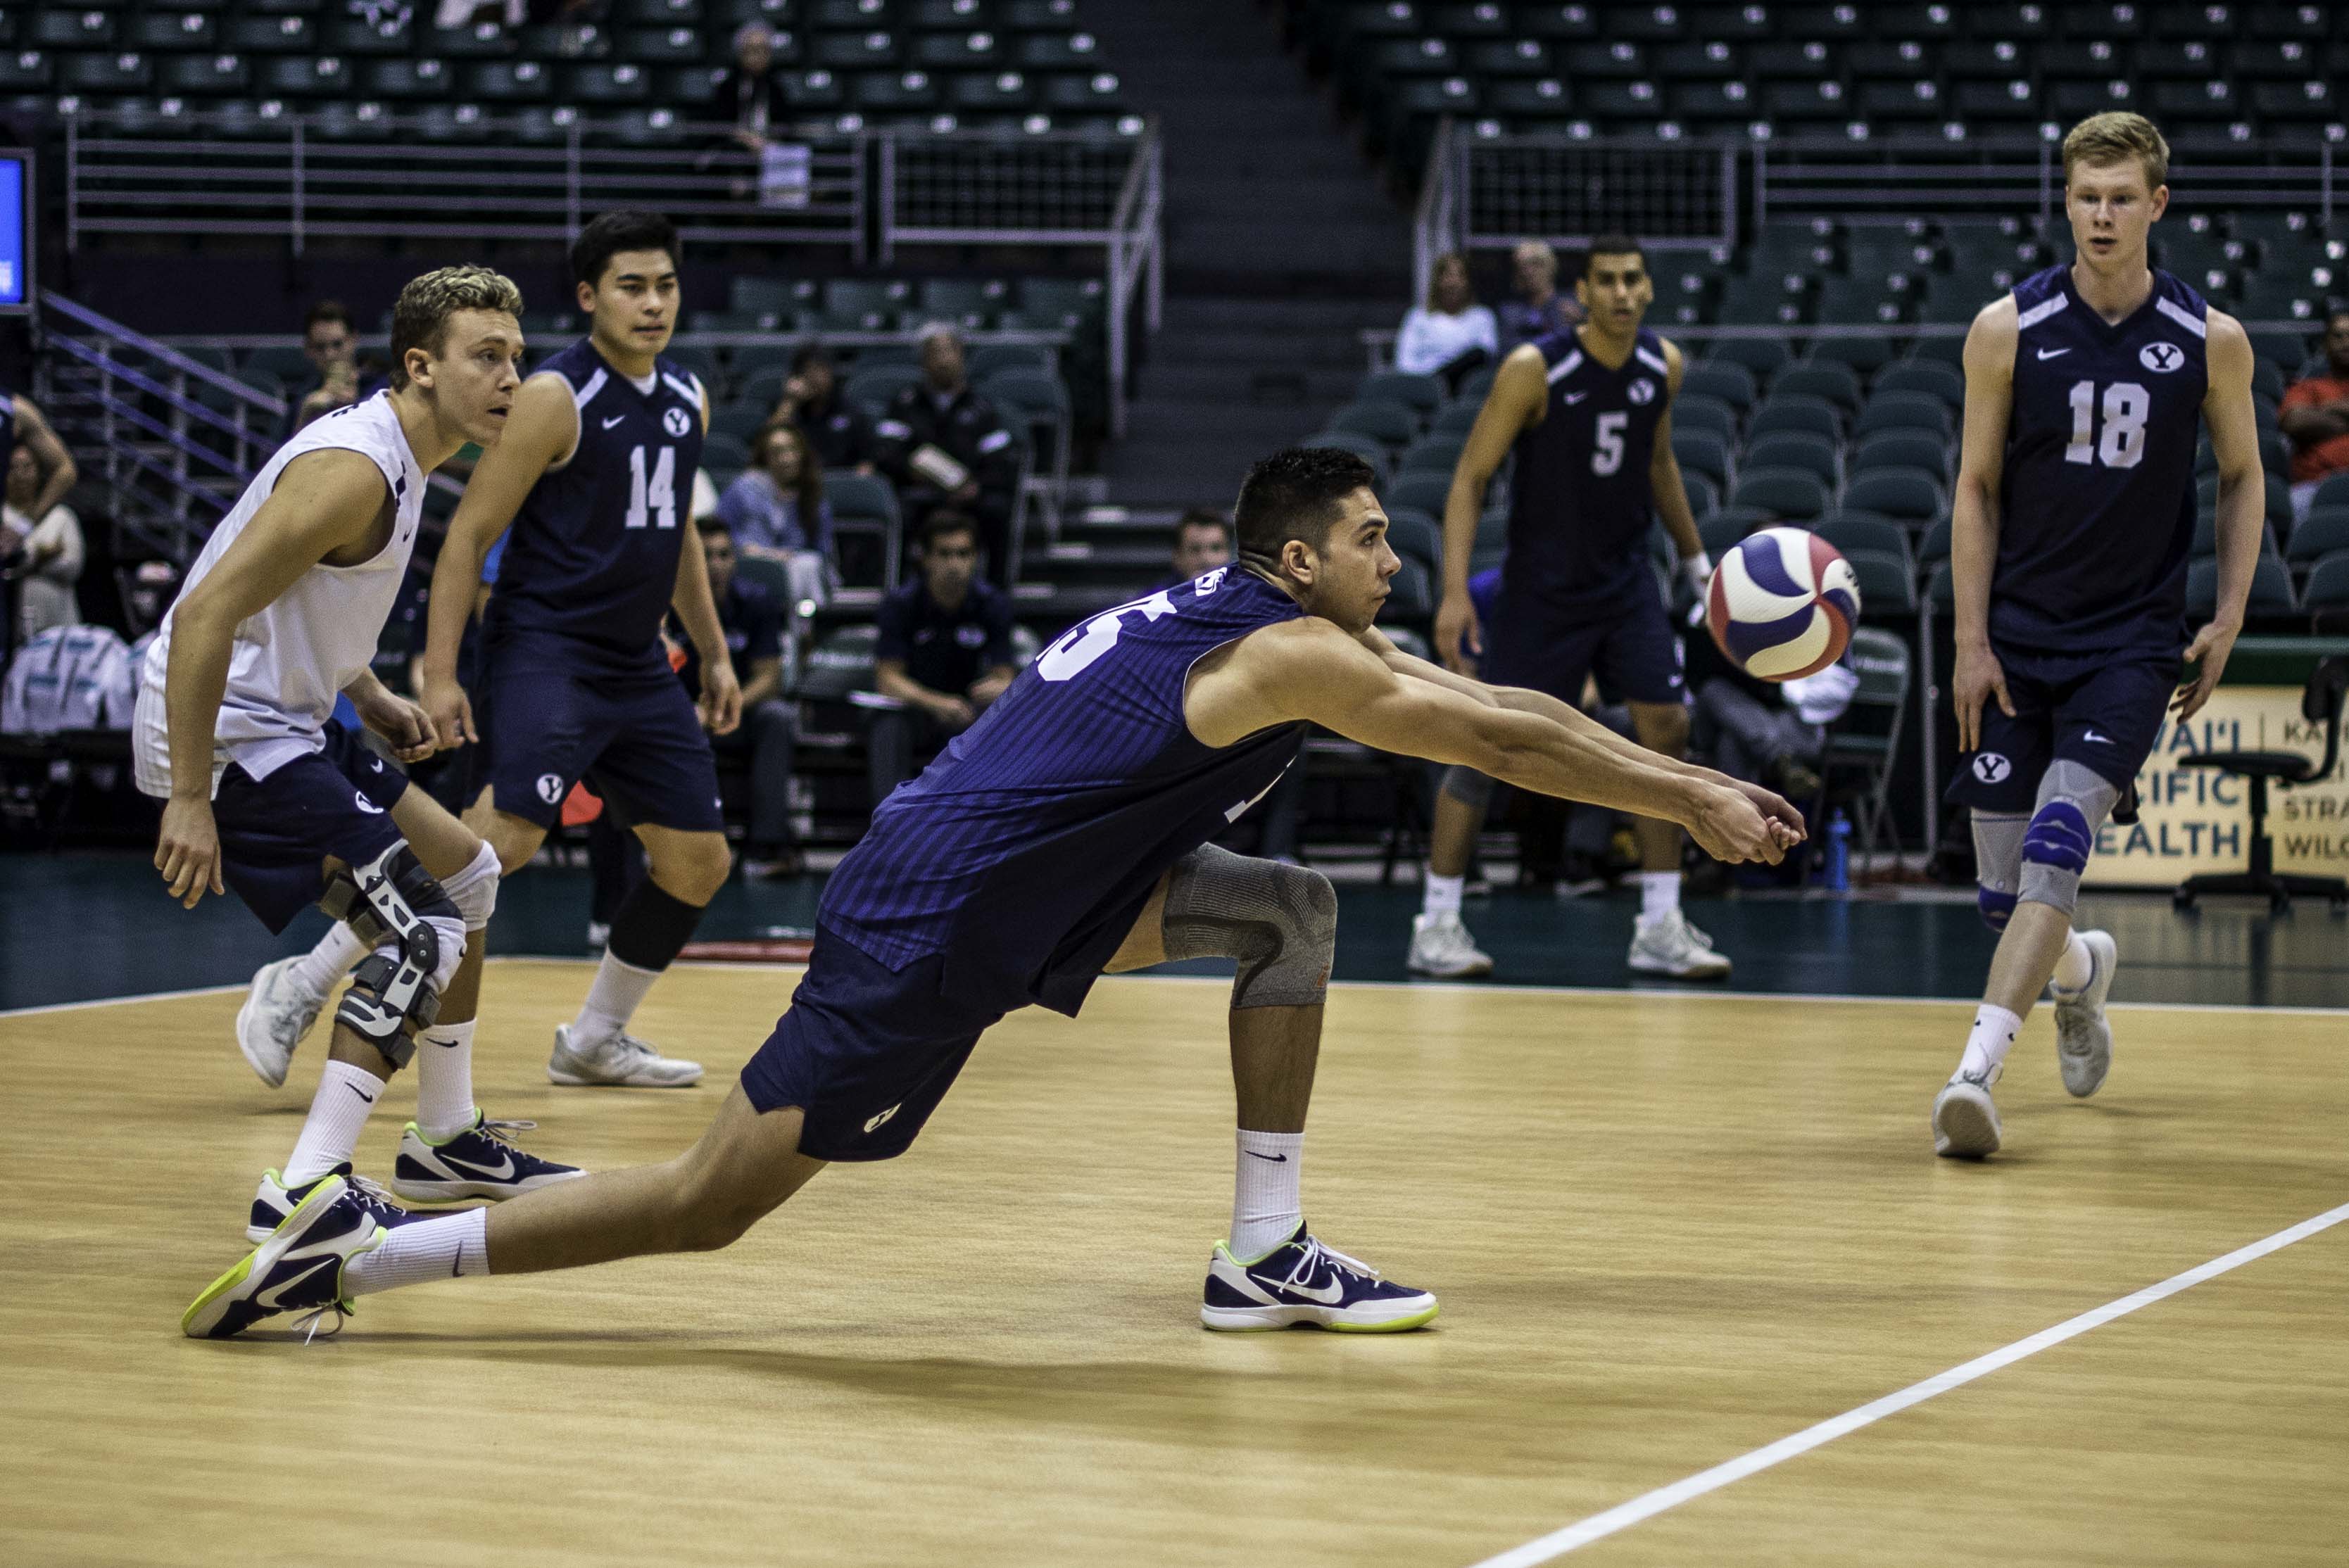 No. 2 BYU men's volleyball returns to Provo on a roll